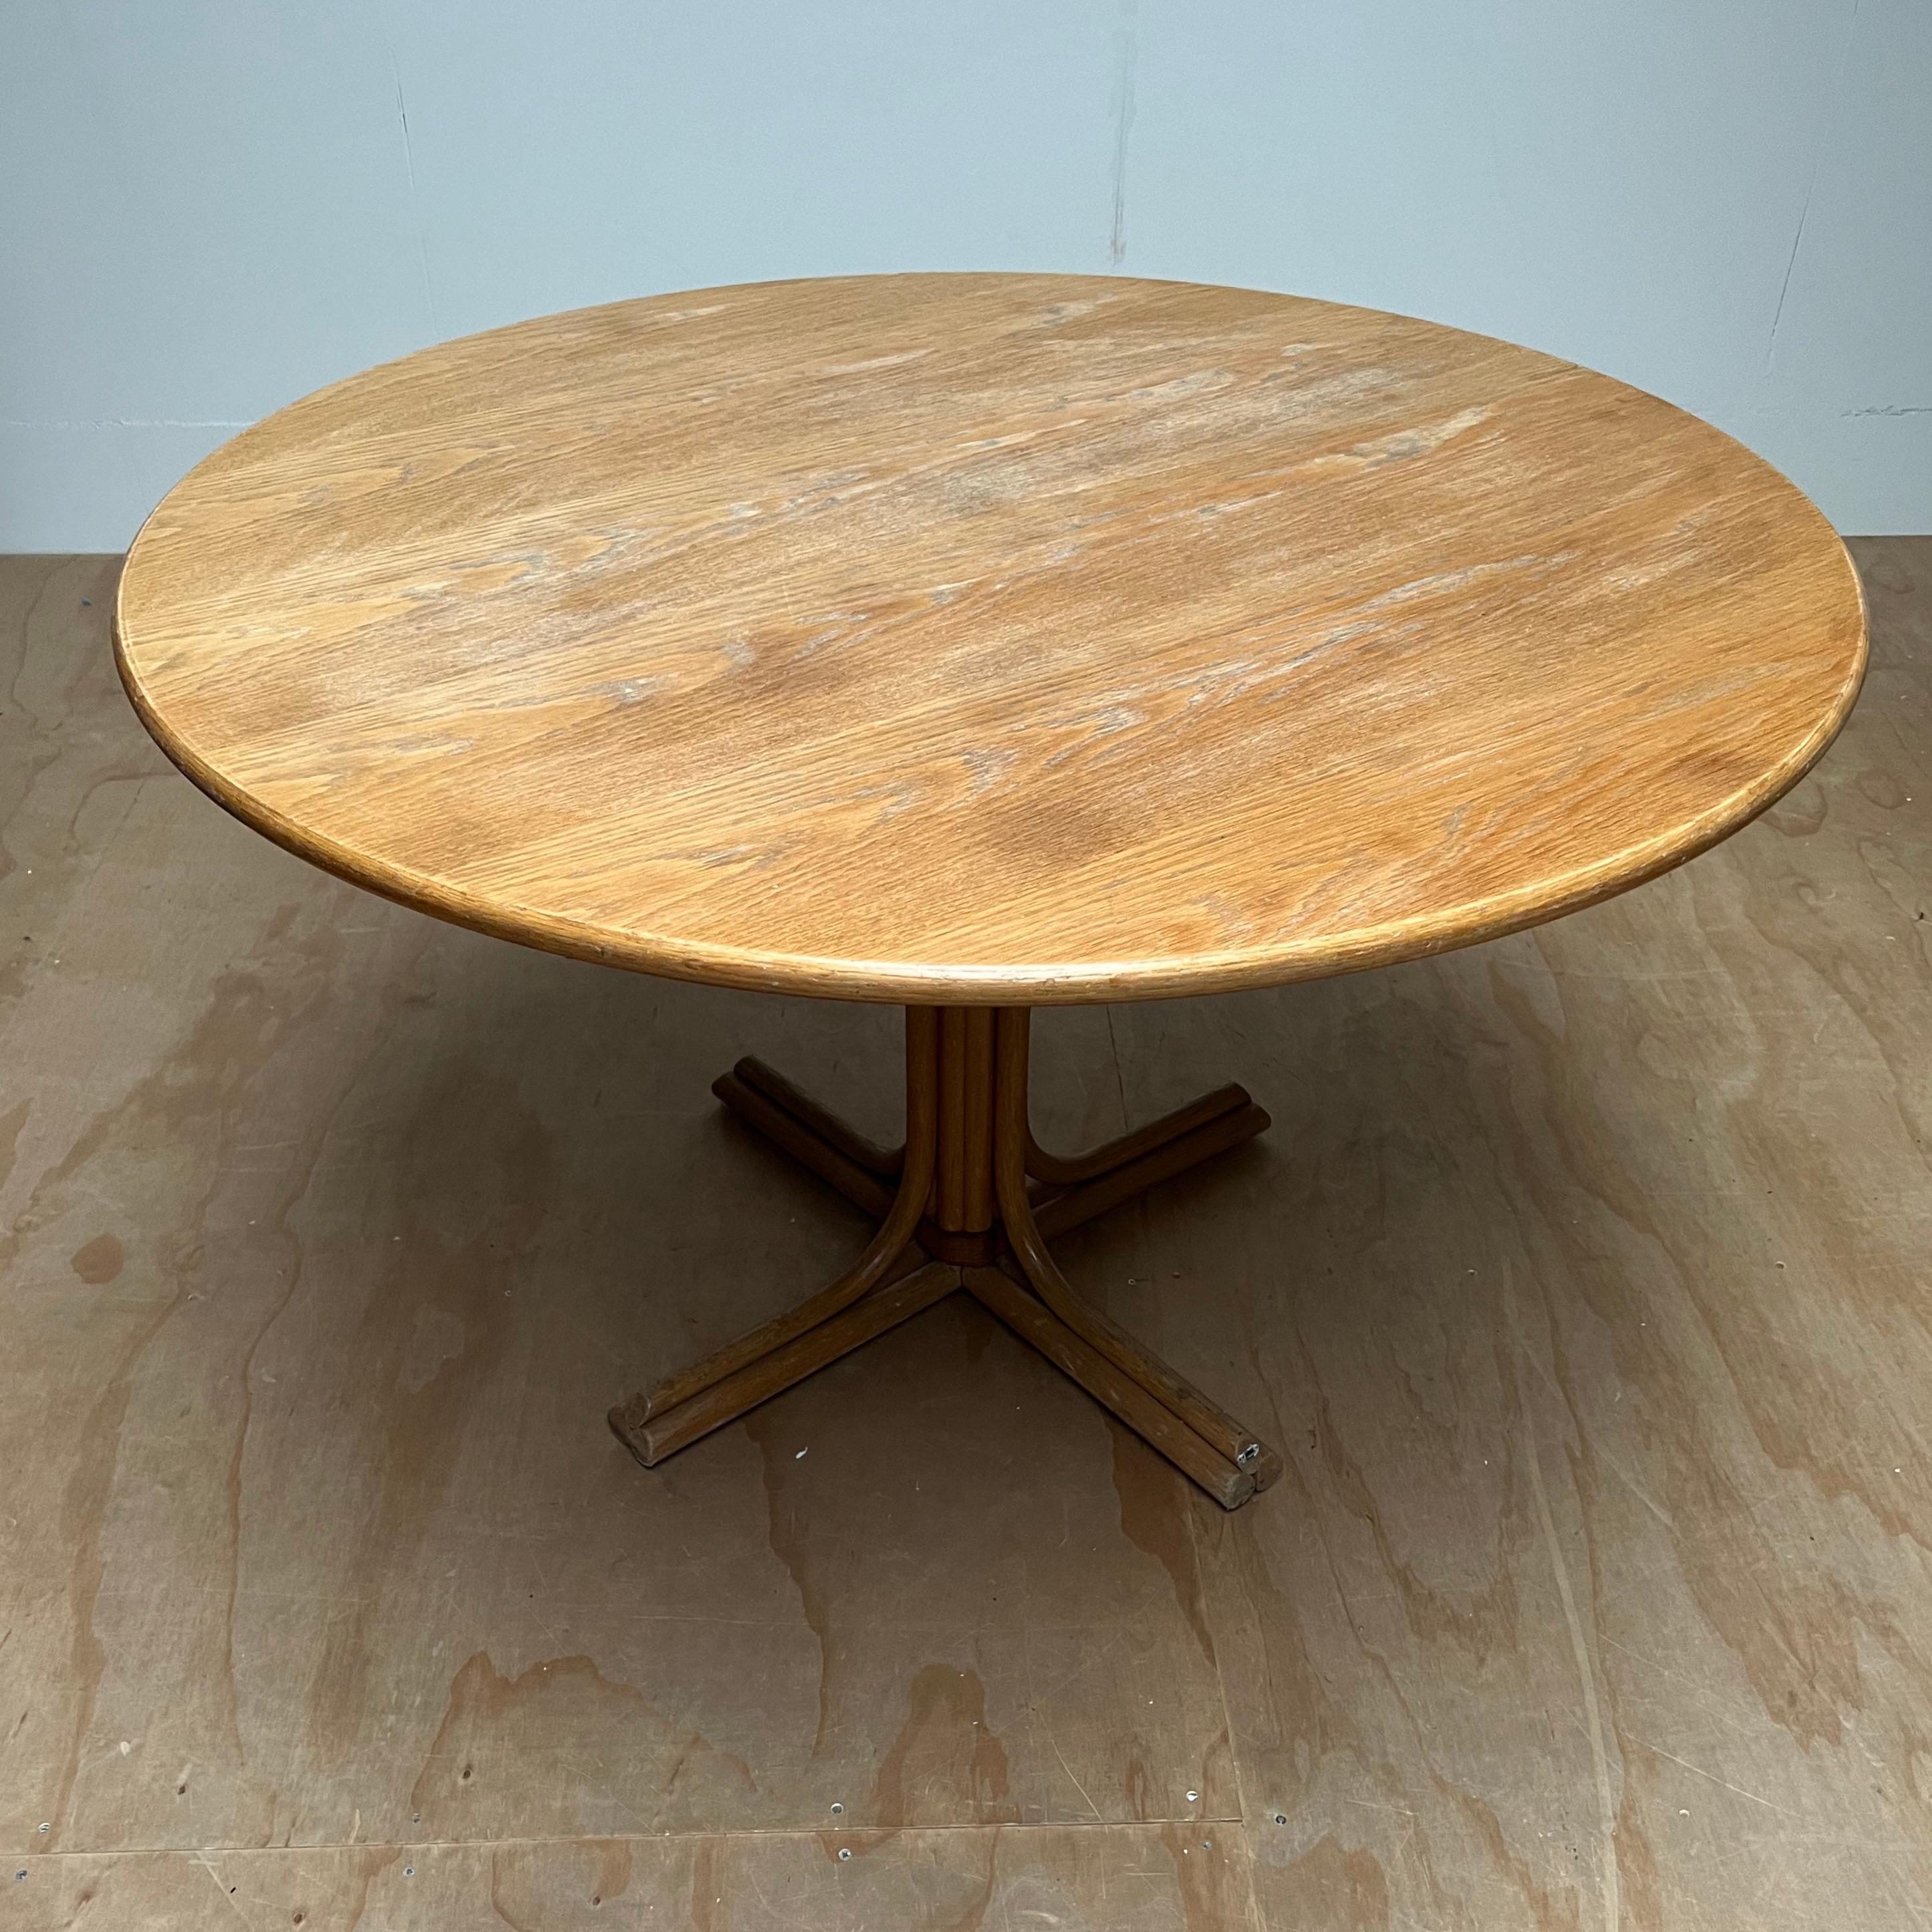 Patinated Rare Handcrafted & Stylish Mid-Century Modern Rattan, Leather & Oak Round Table For Sale